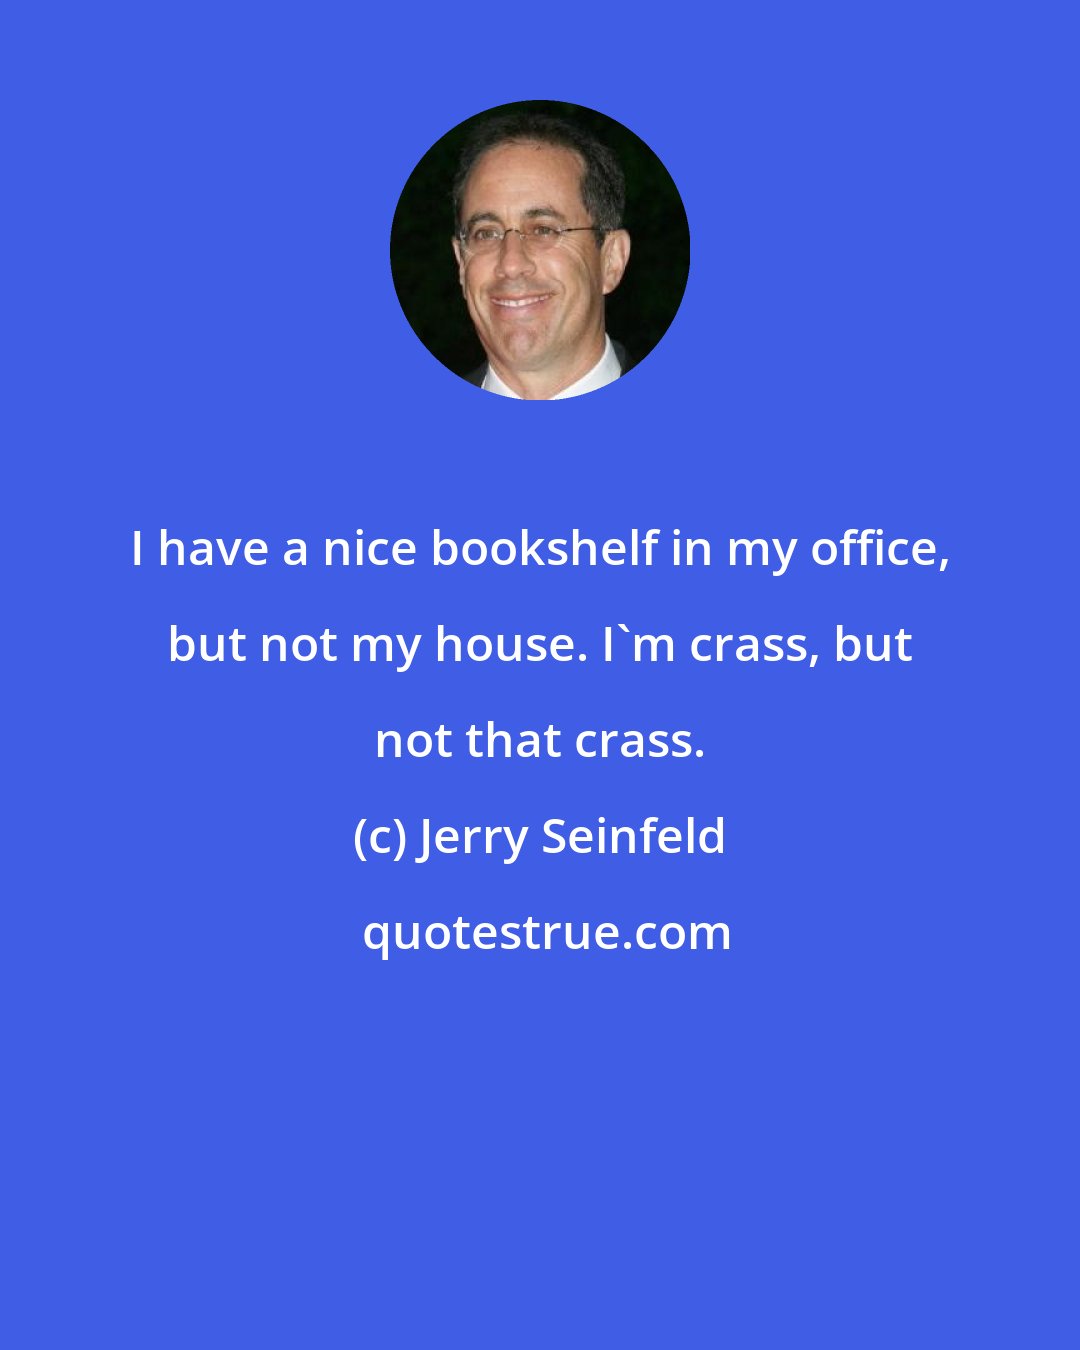 Jerry Seinfeld: I have a nice bookshelf in my office, but not my house. I'm crass, but not that crass.